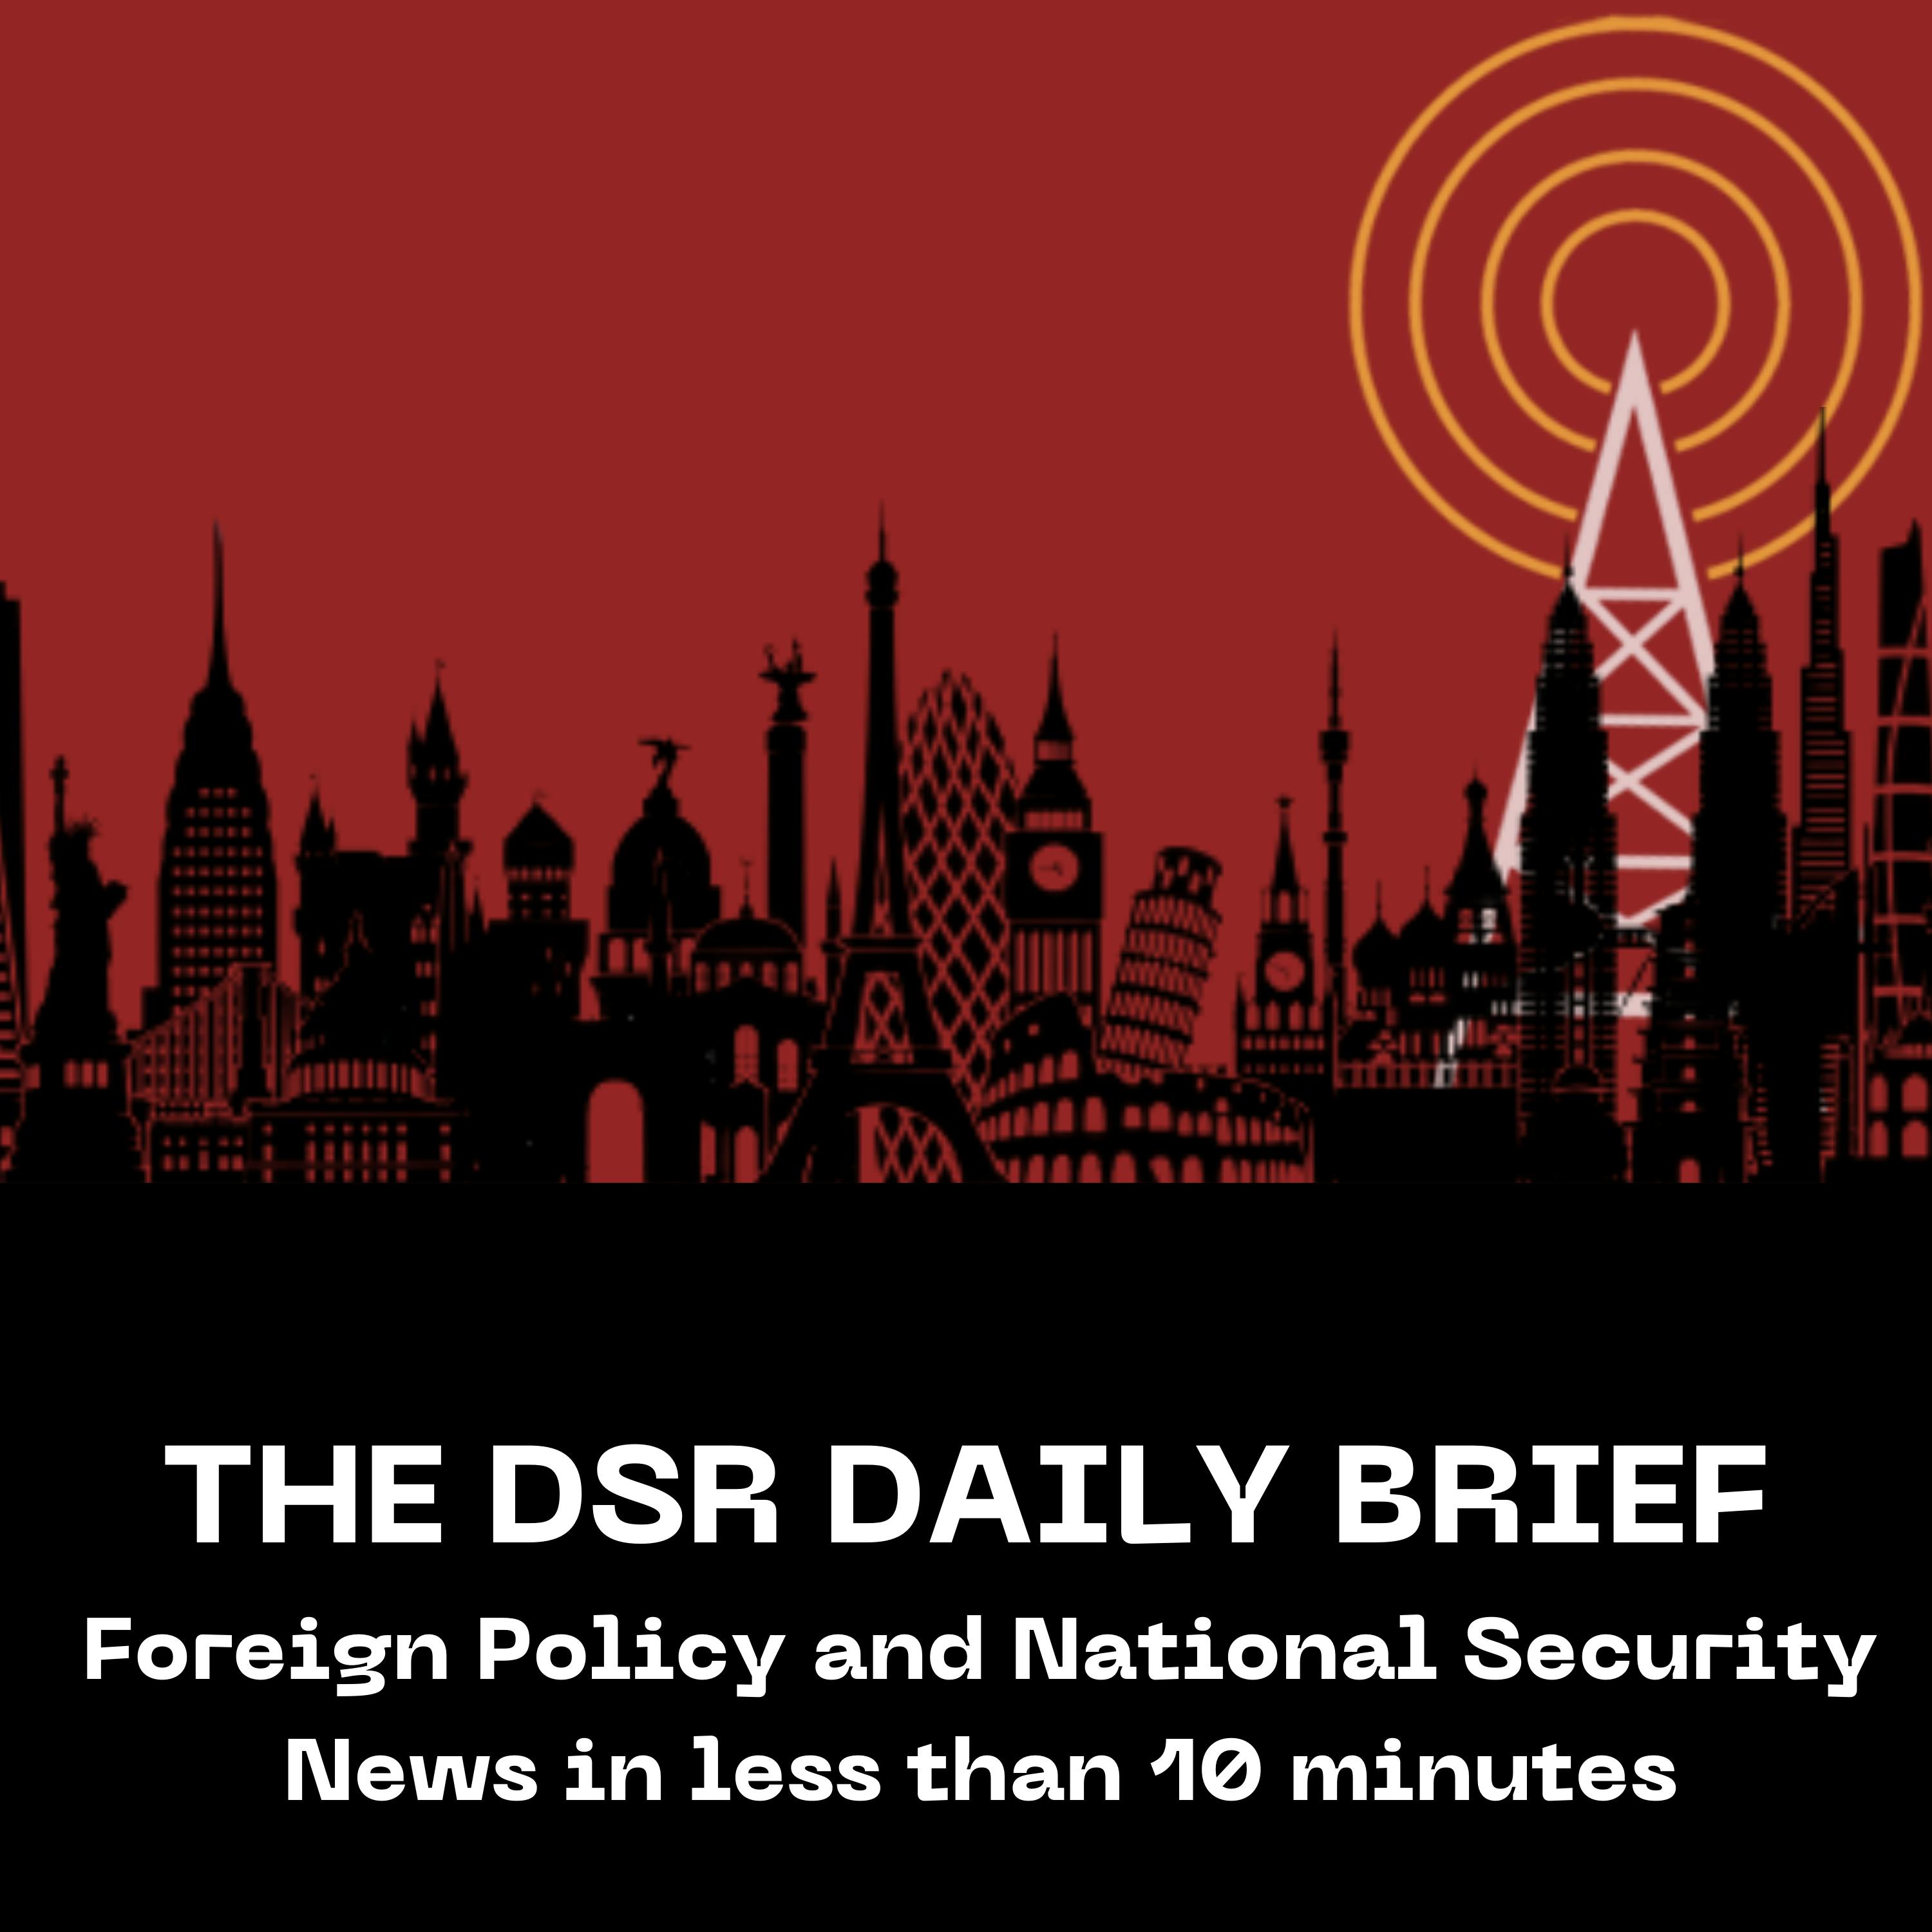 The DSR Daily for May 17: First Aid Trucks Arrive by Pier in Gaza, Trump’s FBI Overhaul Revealed